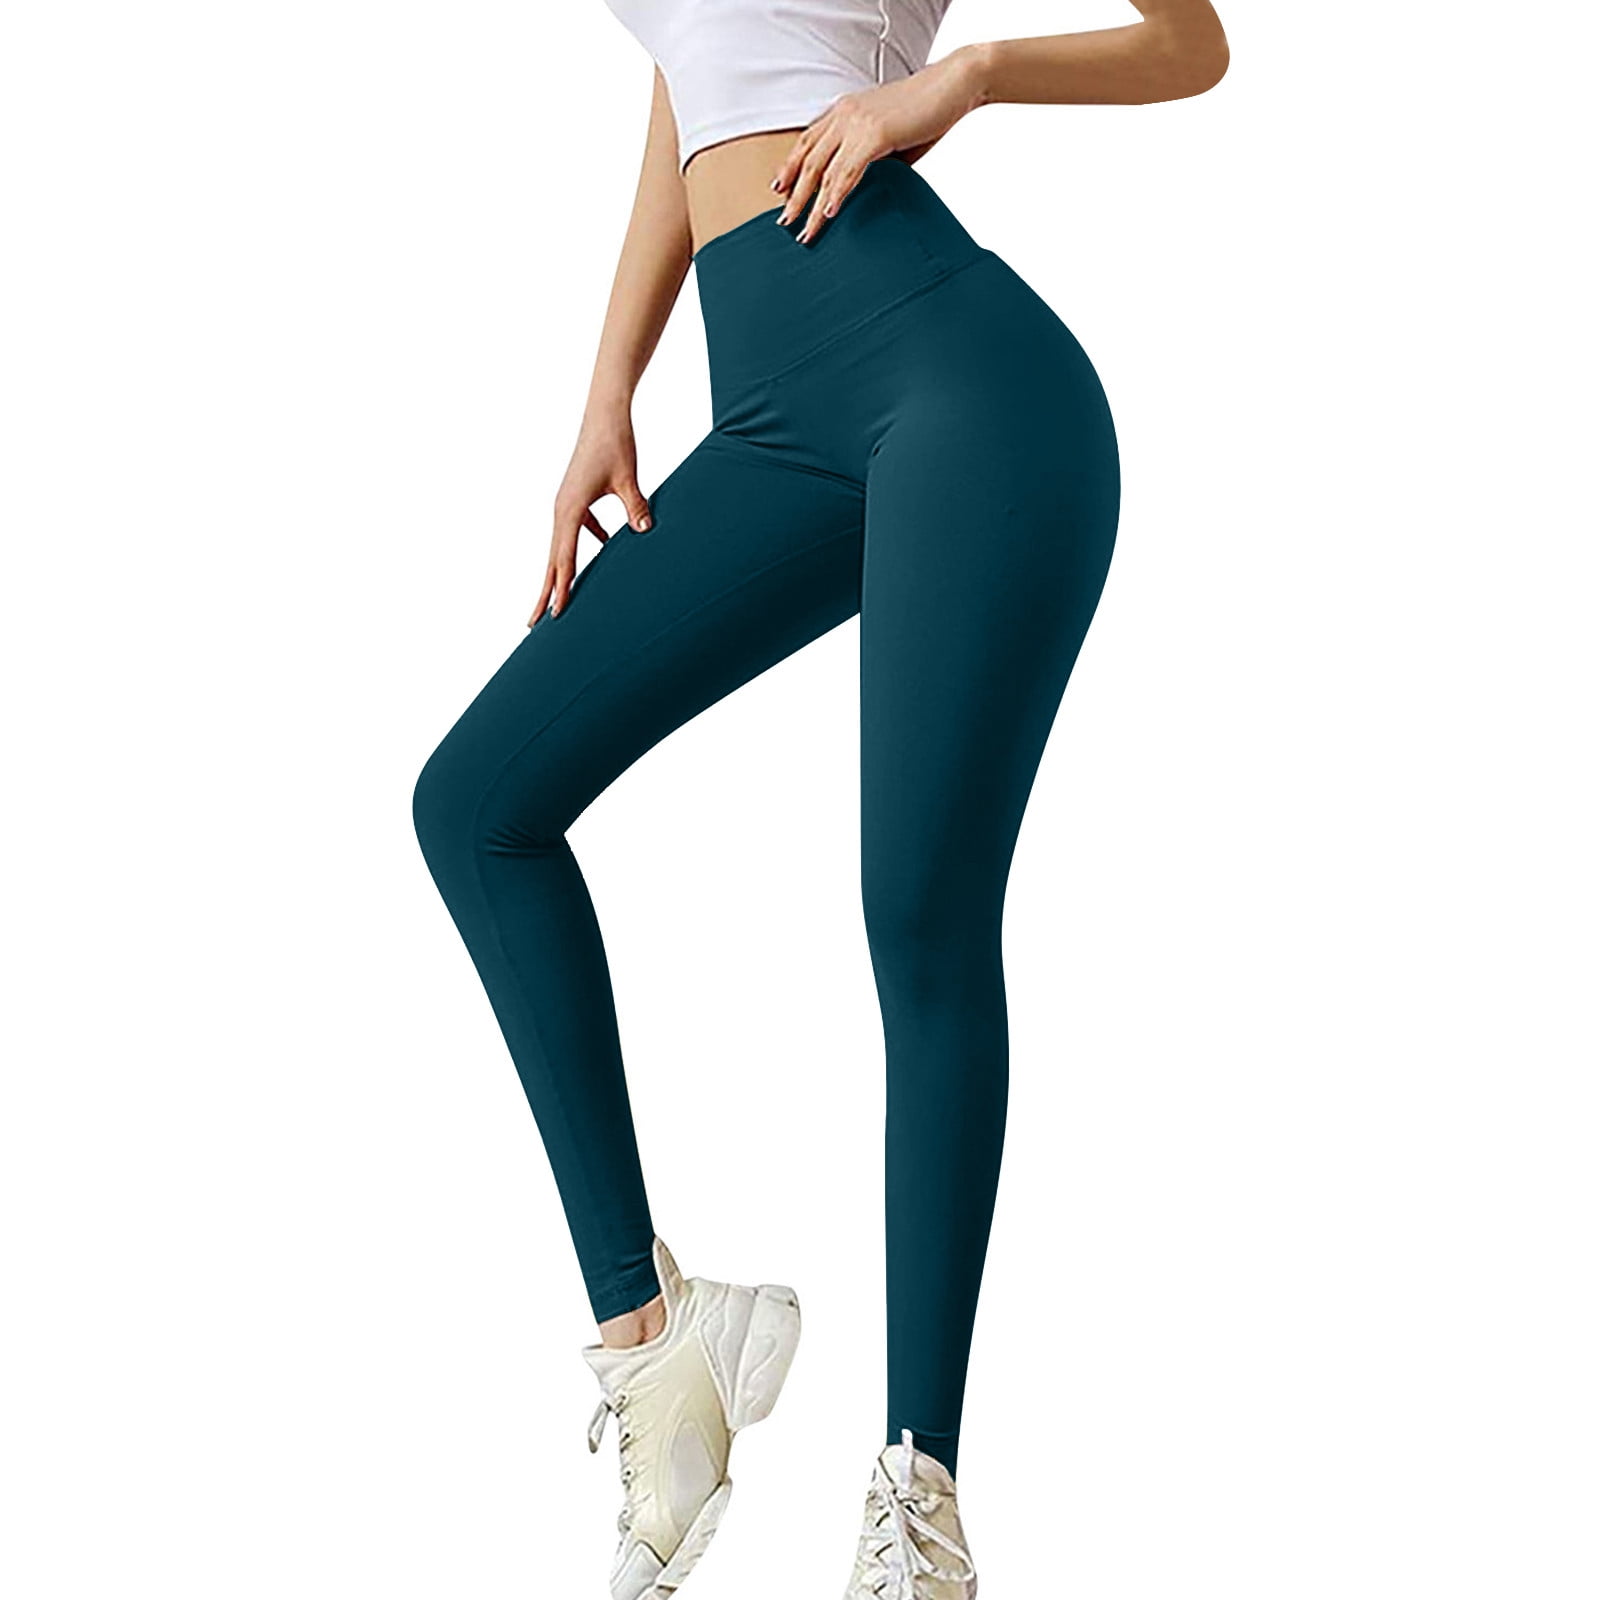 Womens Stretch Yoga Leggings Fitness Running Gym Sports Full Length Active  Pants Tietoc